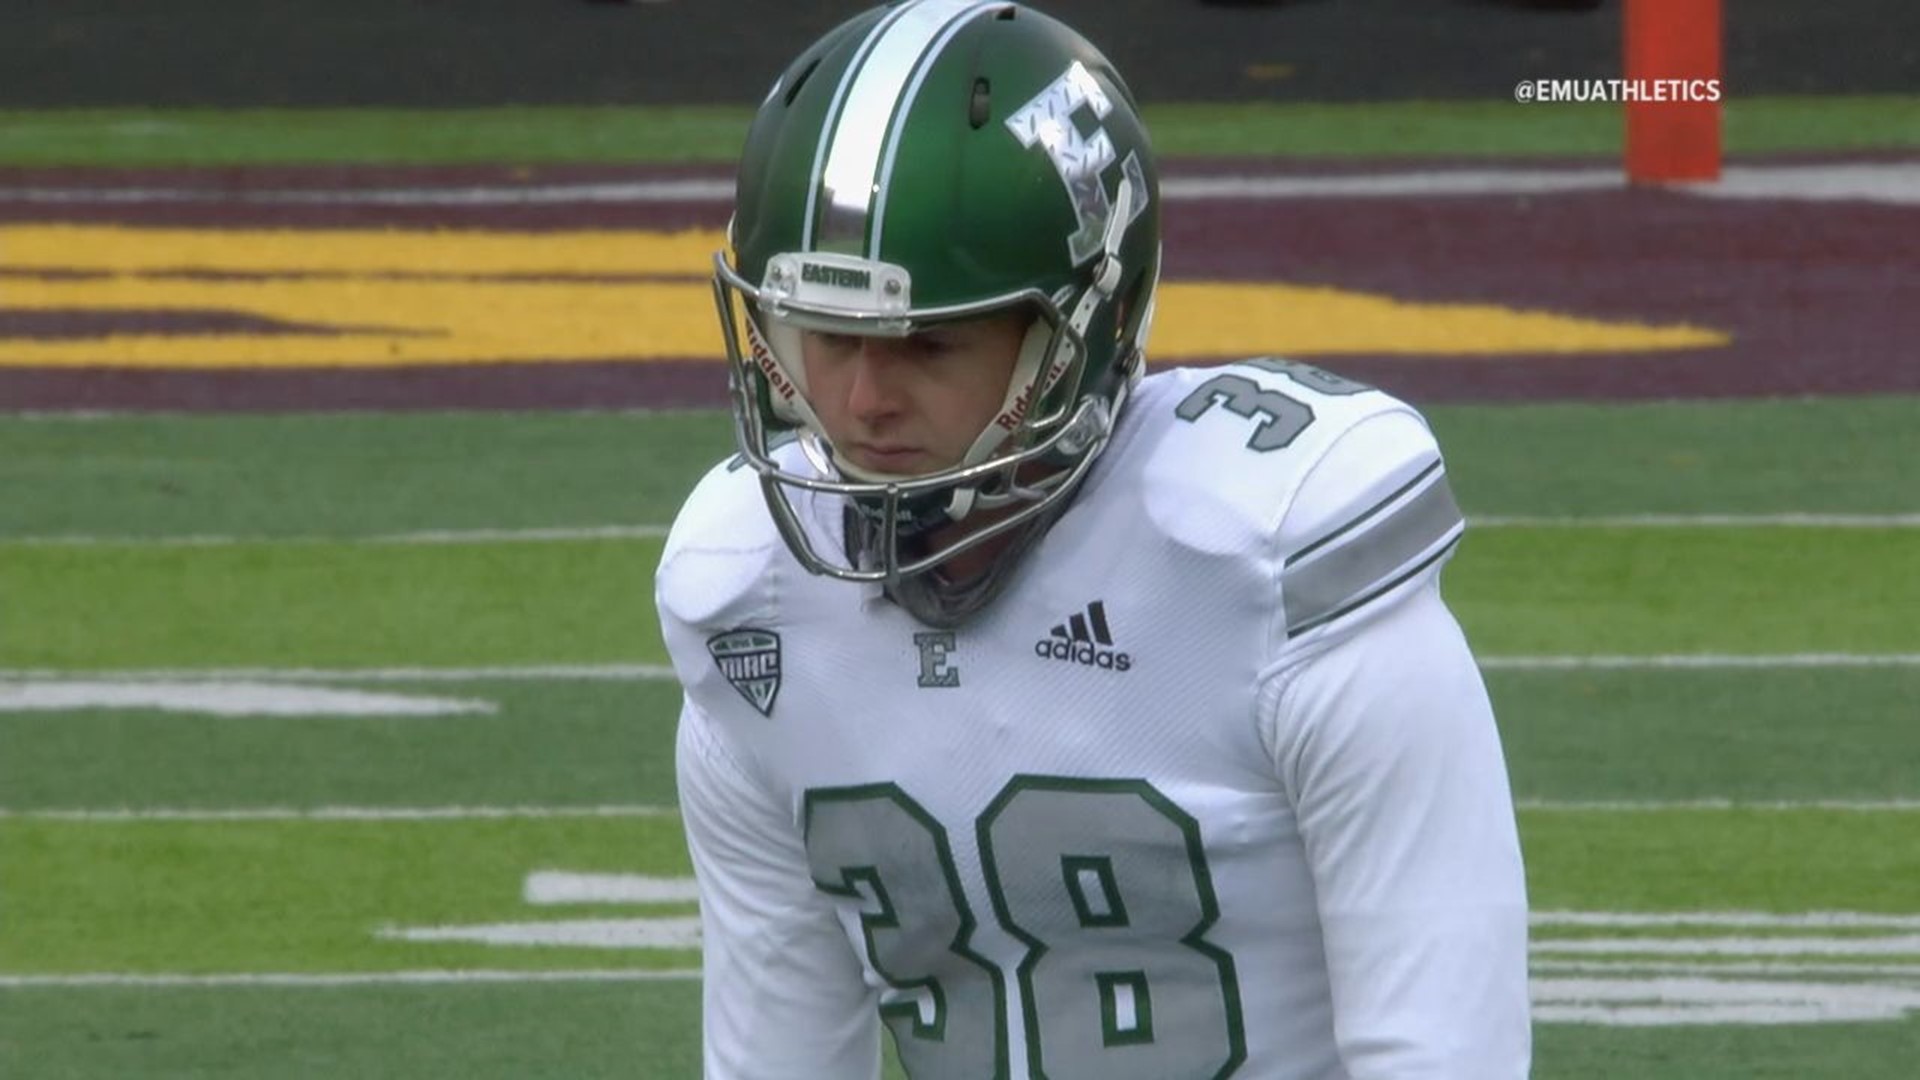 Chad Ryland and Eastern Michigan will head to Mobile, Alabama to meet Liberty University in the LendingTree Bowl.